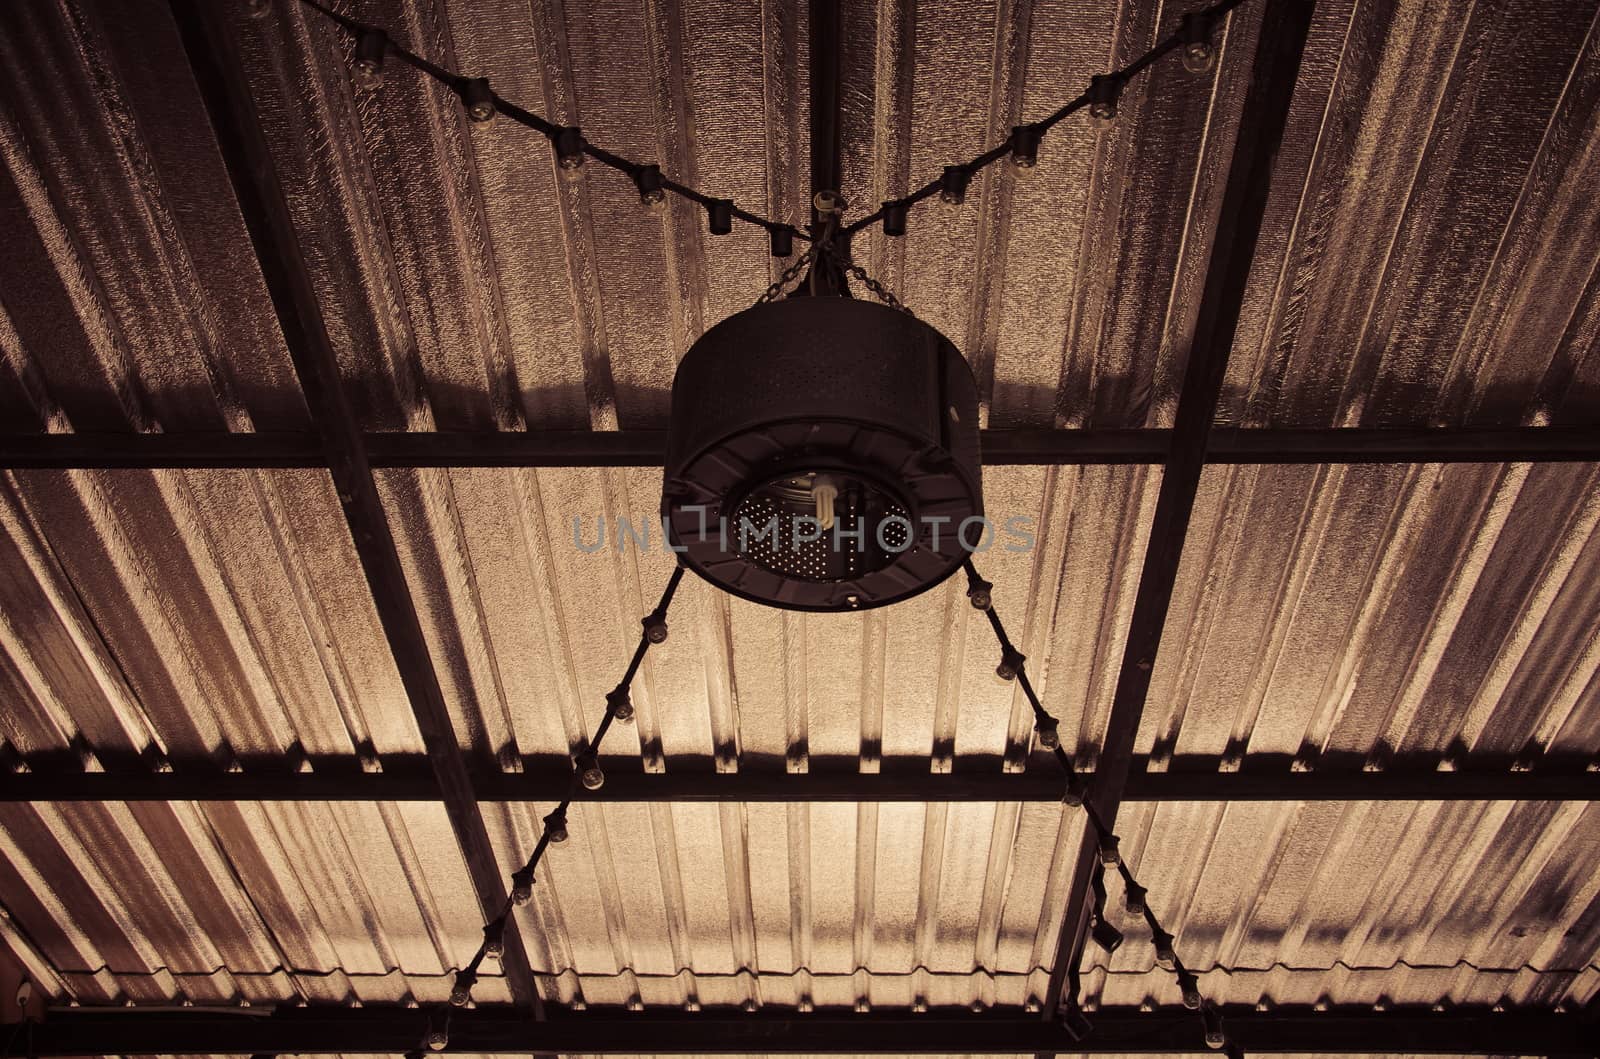 Steel lamp for lighting warm tone by worrayuth